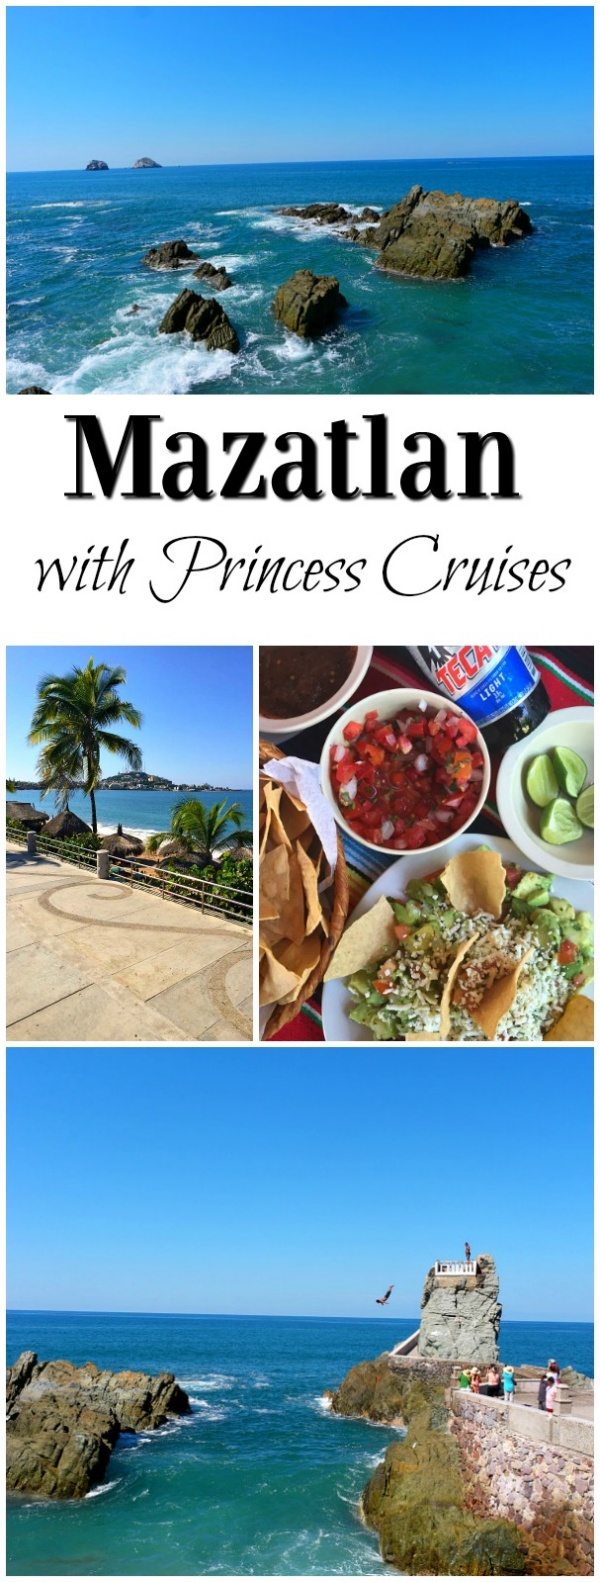 Princess Cruises Excursions in Mazatlán, Mexico~ while traveling aboard the ship The Ruby Princess